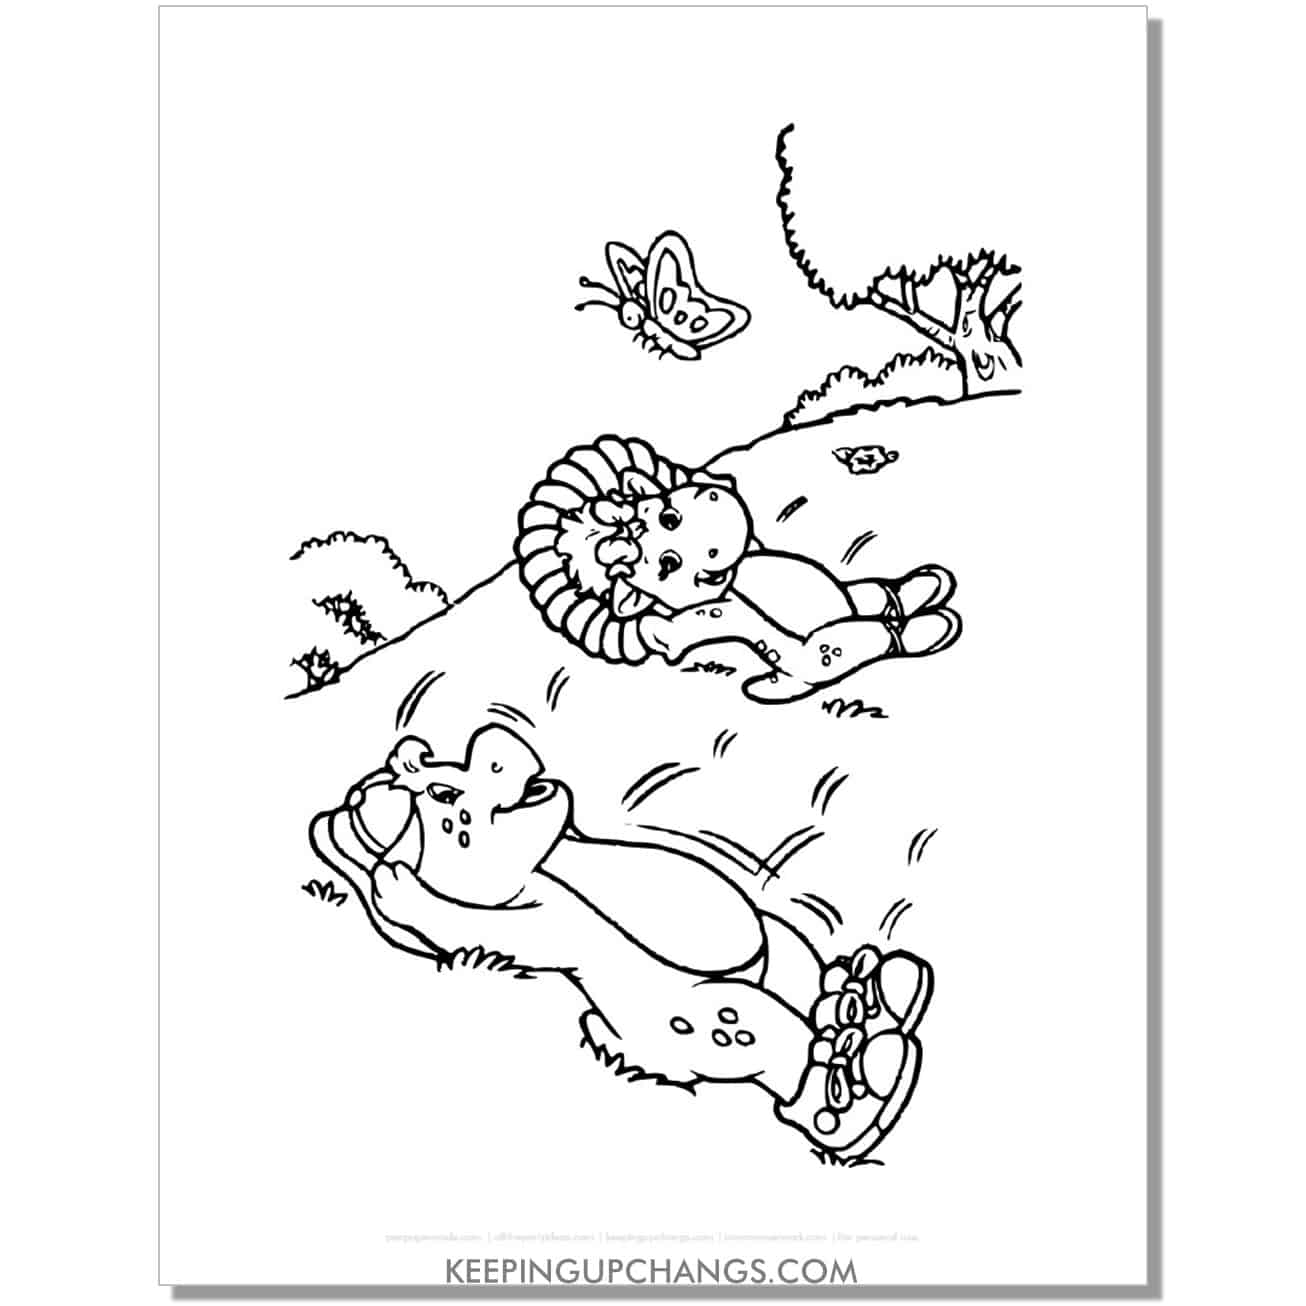 free baby bop, bj rolling down hill coloring page, sheet.